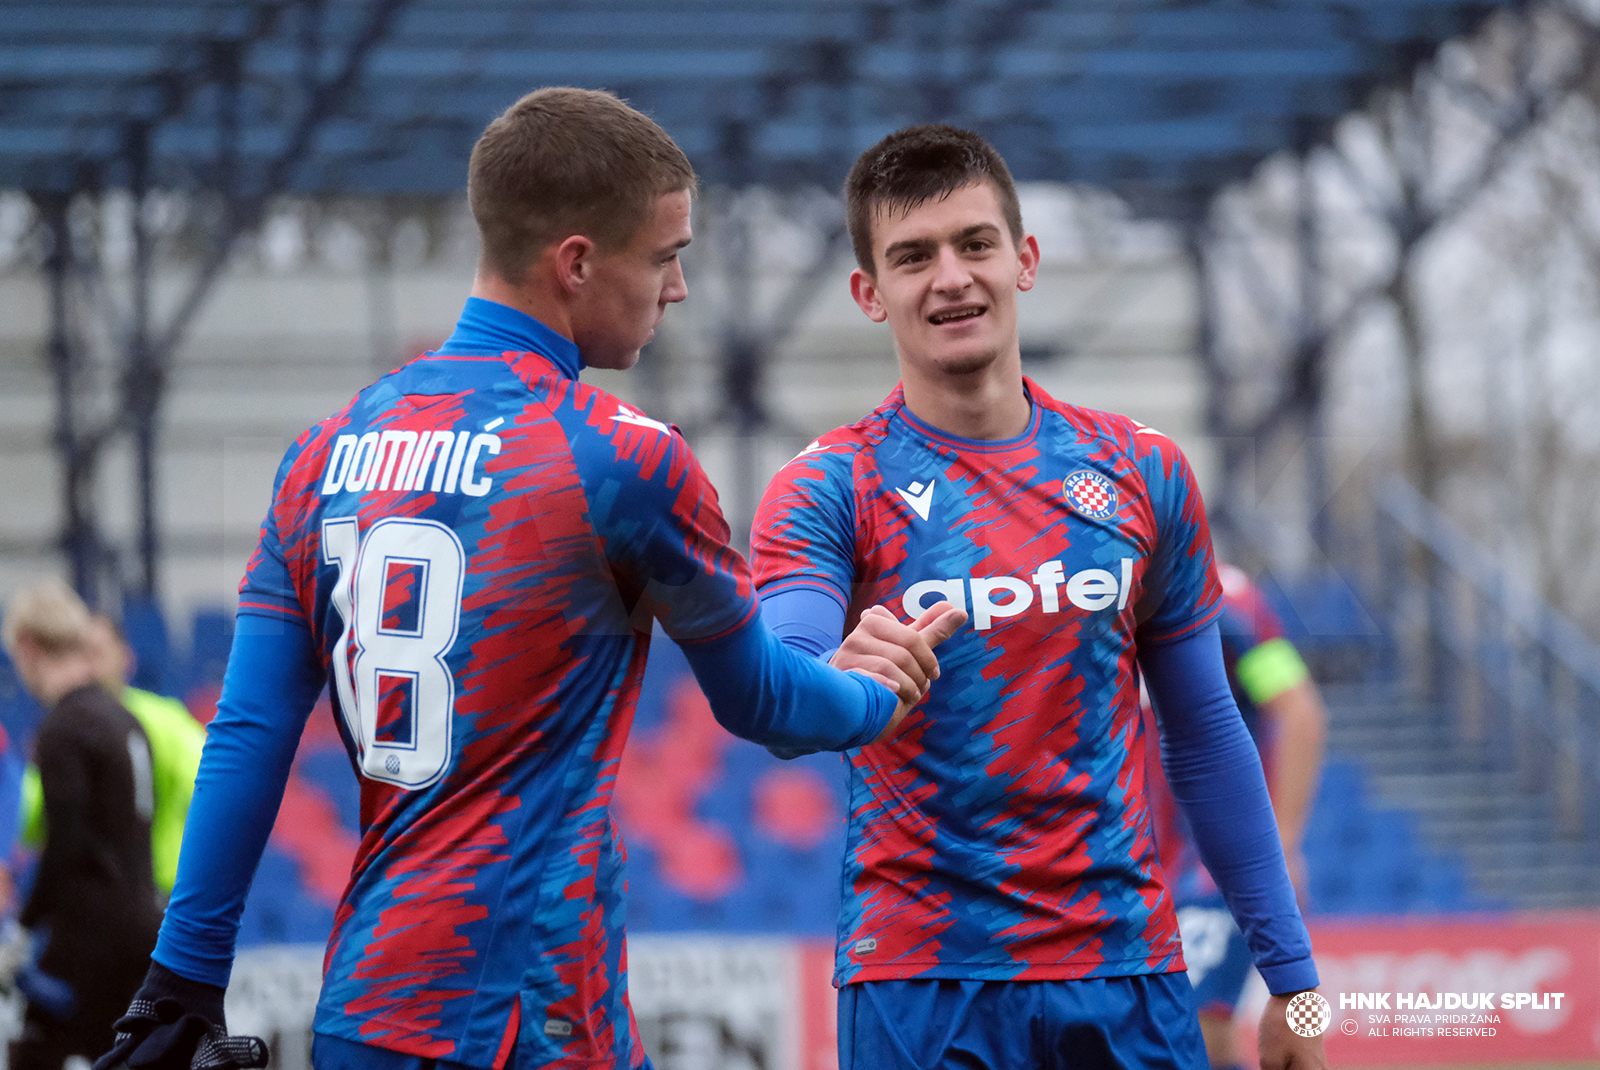 The U-19 team qualified for the play-offs of the UEFA Youth League • HNK Hajduk  Split